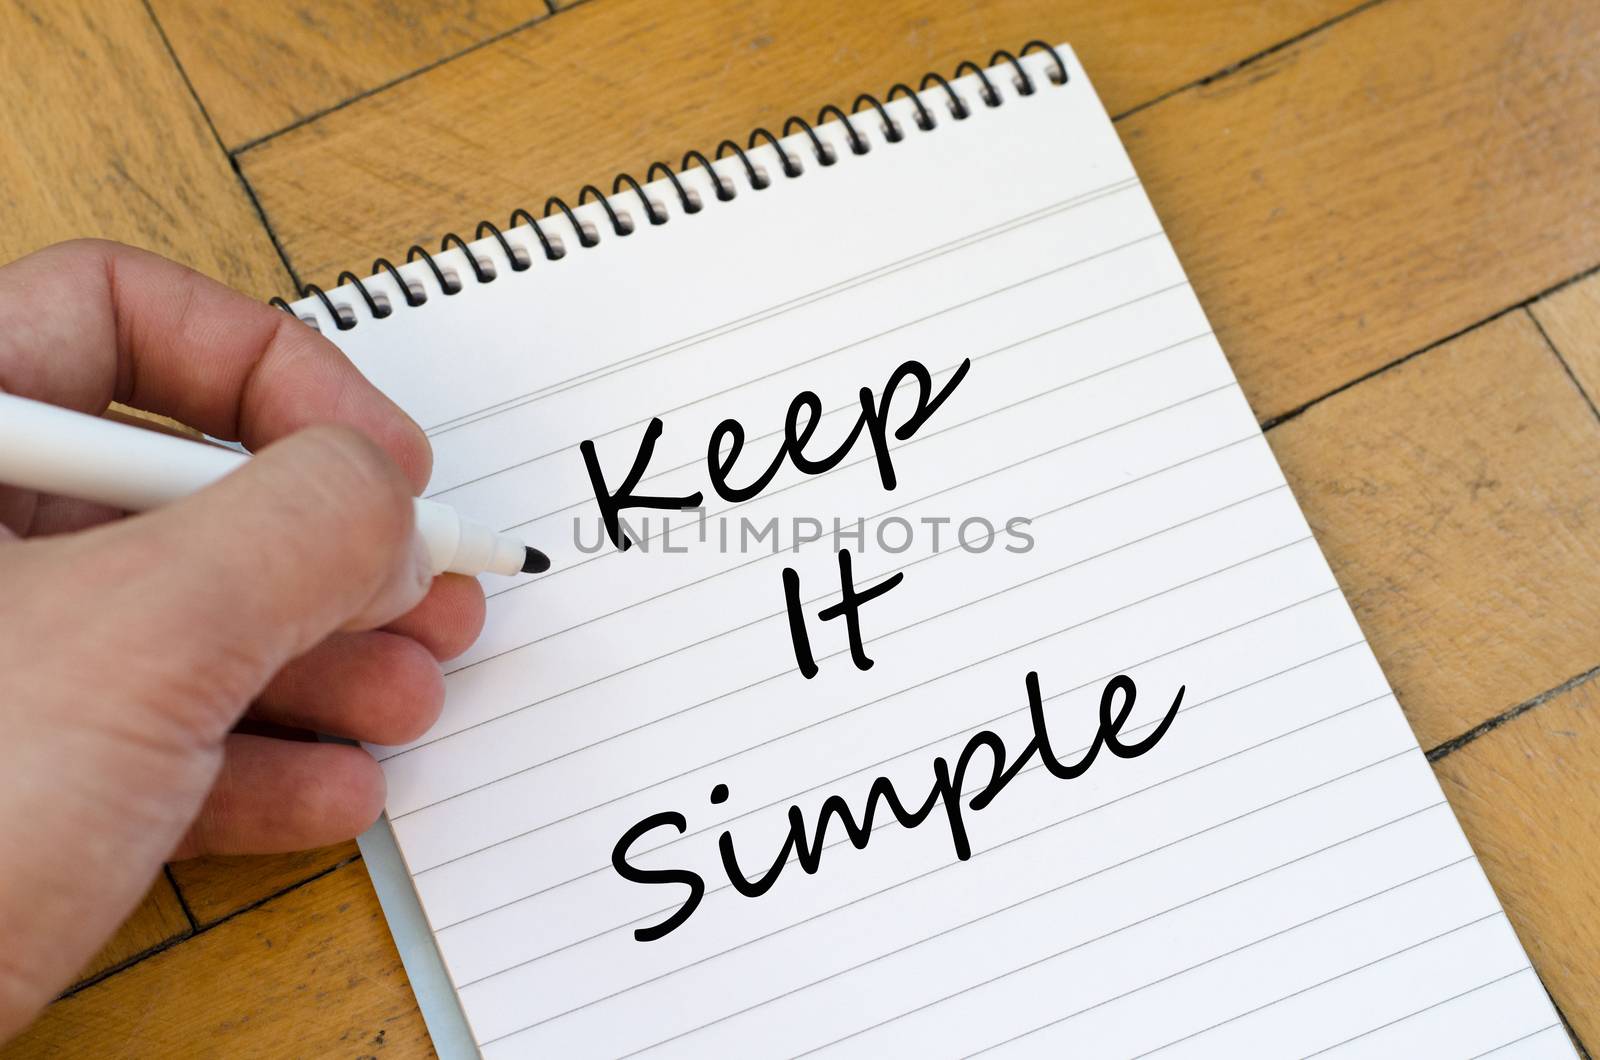 Keep it simple text concept write on notebook